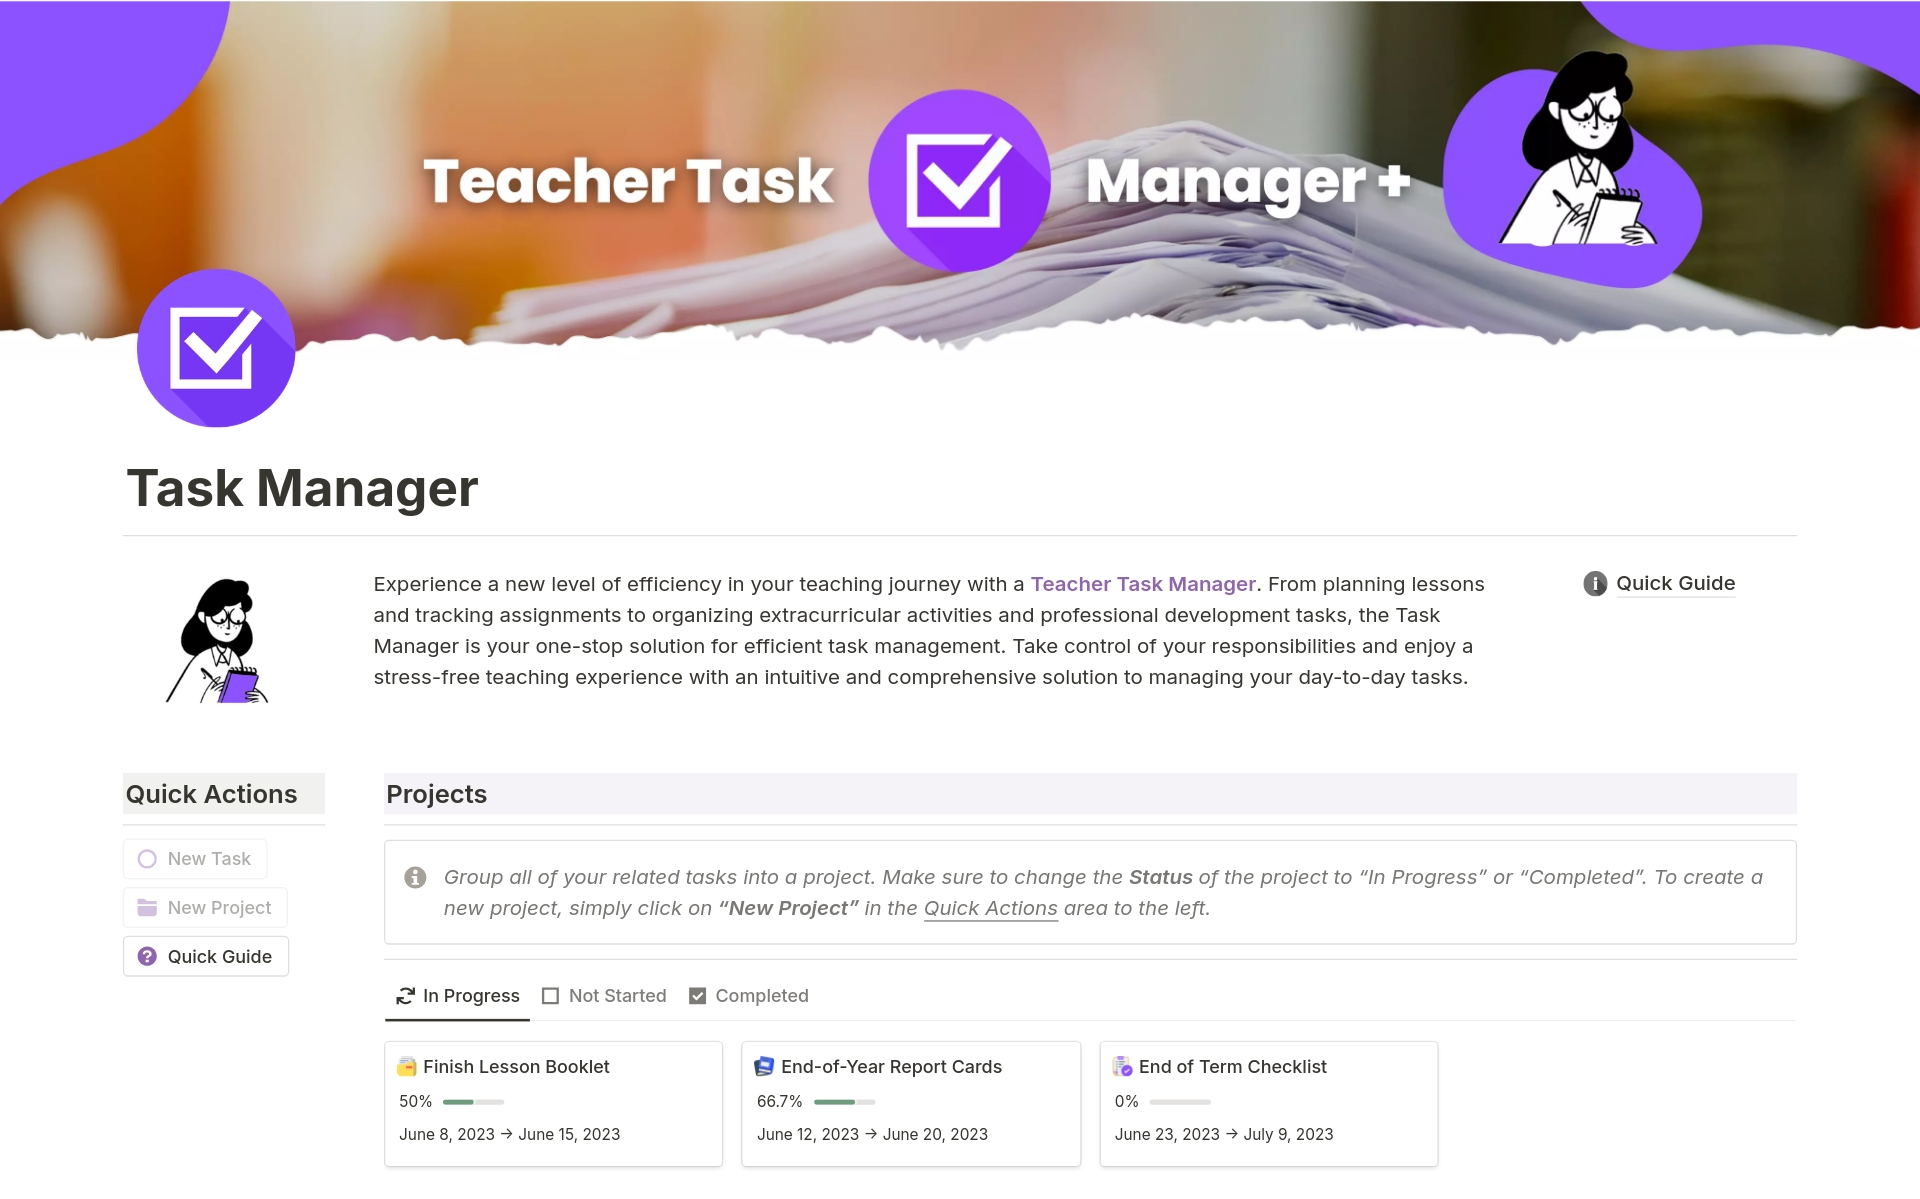 The Task Manager streamlines task organization and project management for teachers, allowing them to efficiently manage and prioritize their responsibilities in one convenient platform.